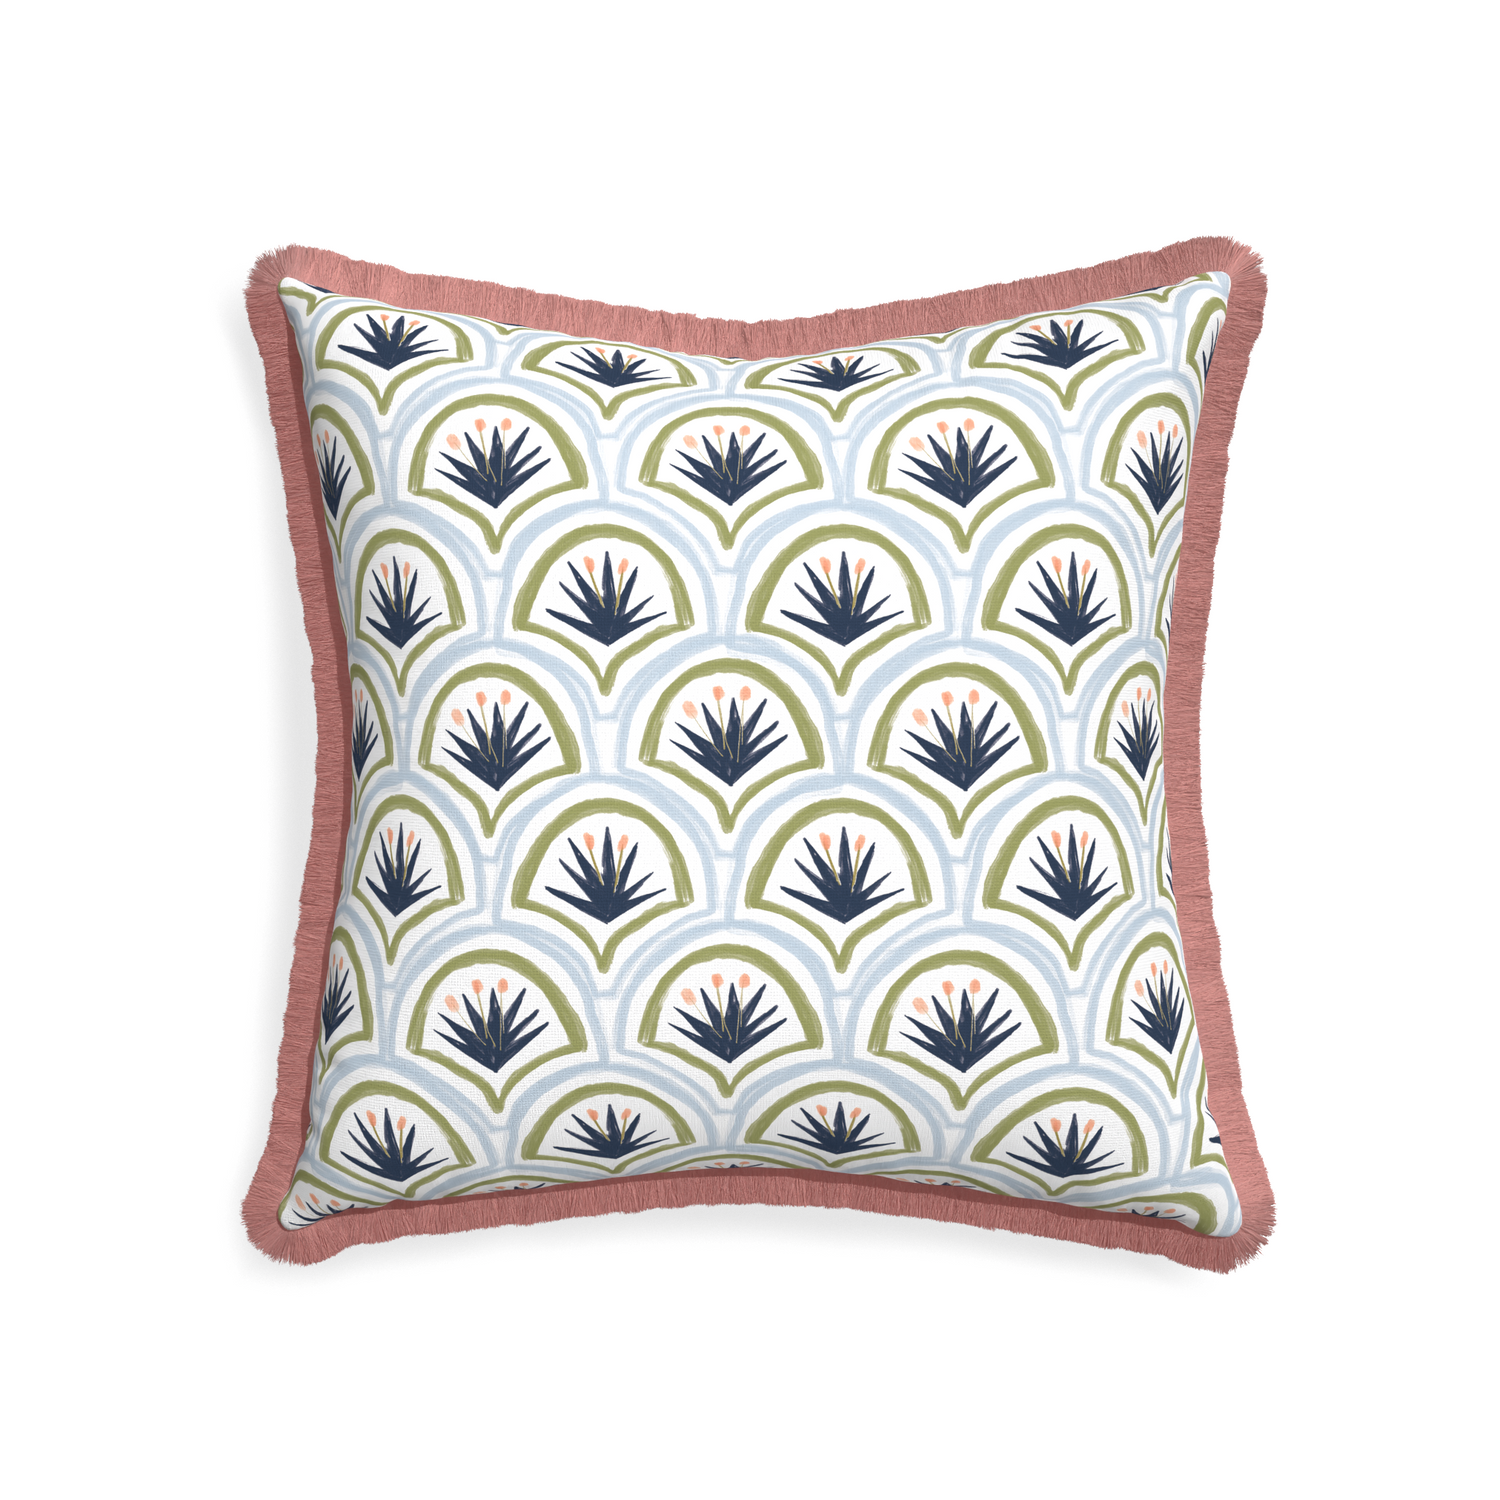 22-square thatcher midnight custom art deco palm patternpillow with d fringe on white background